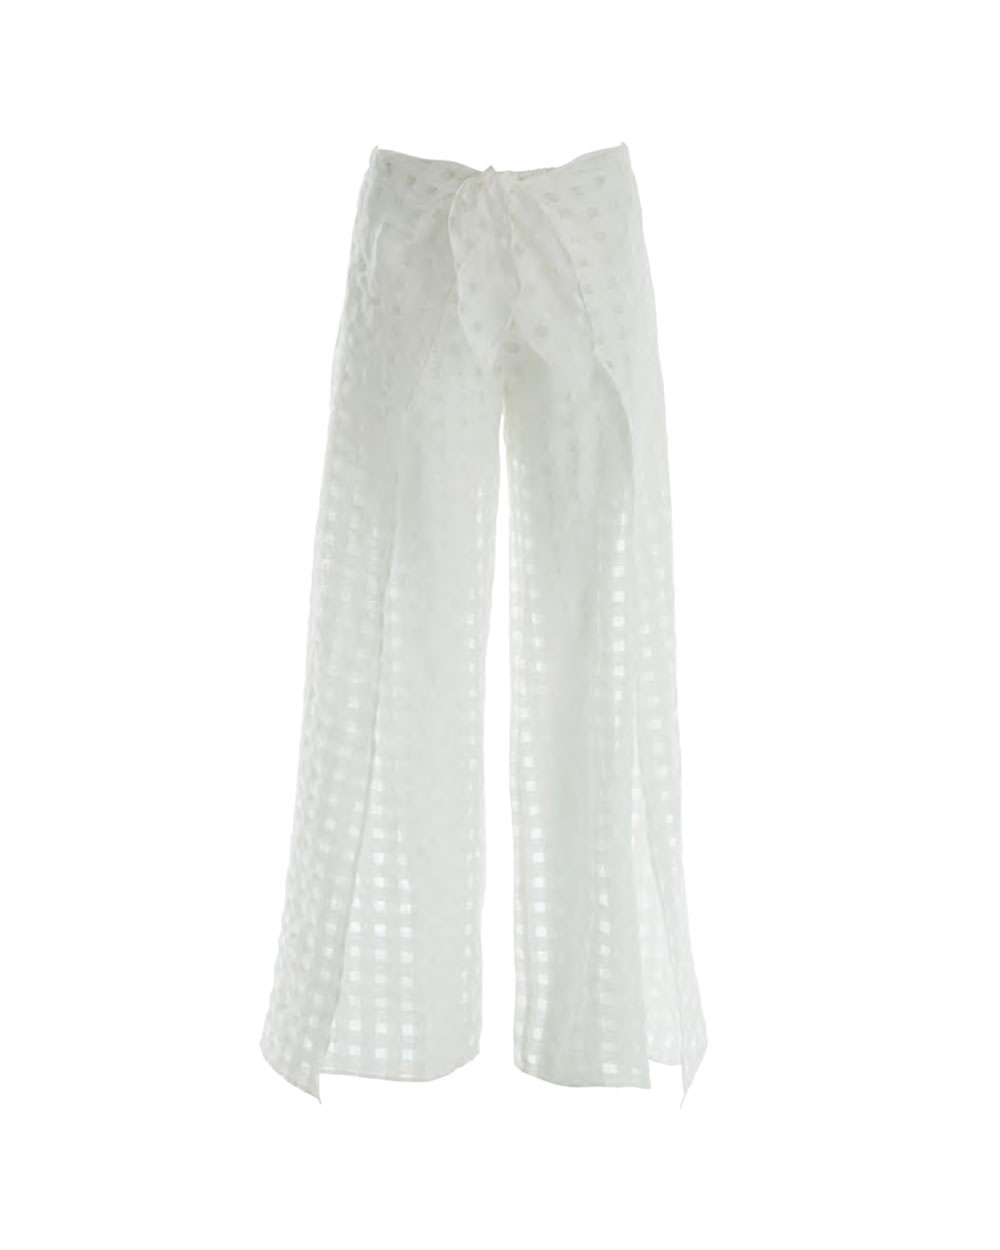 Trelise Cooper trousers, $499